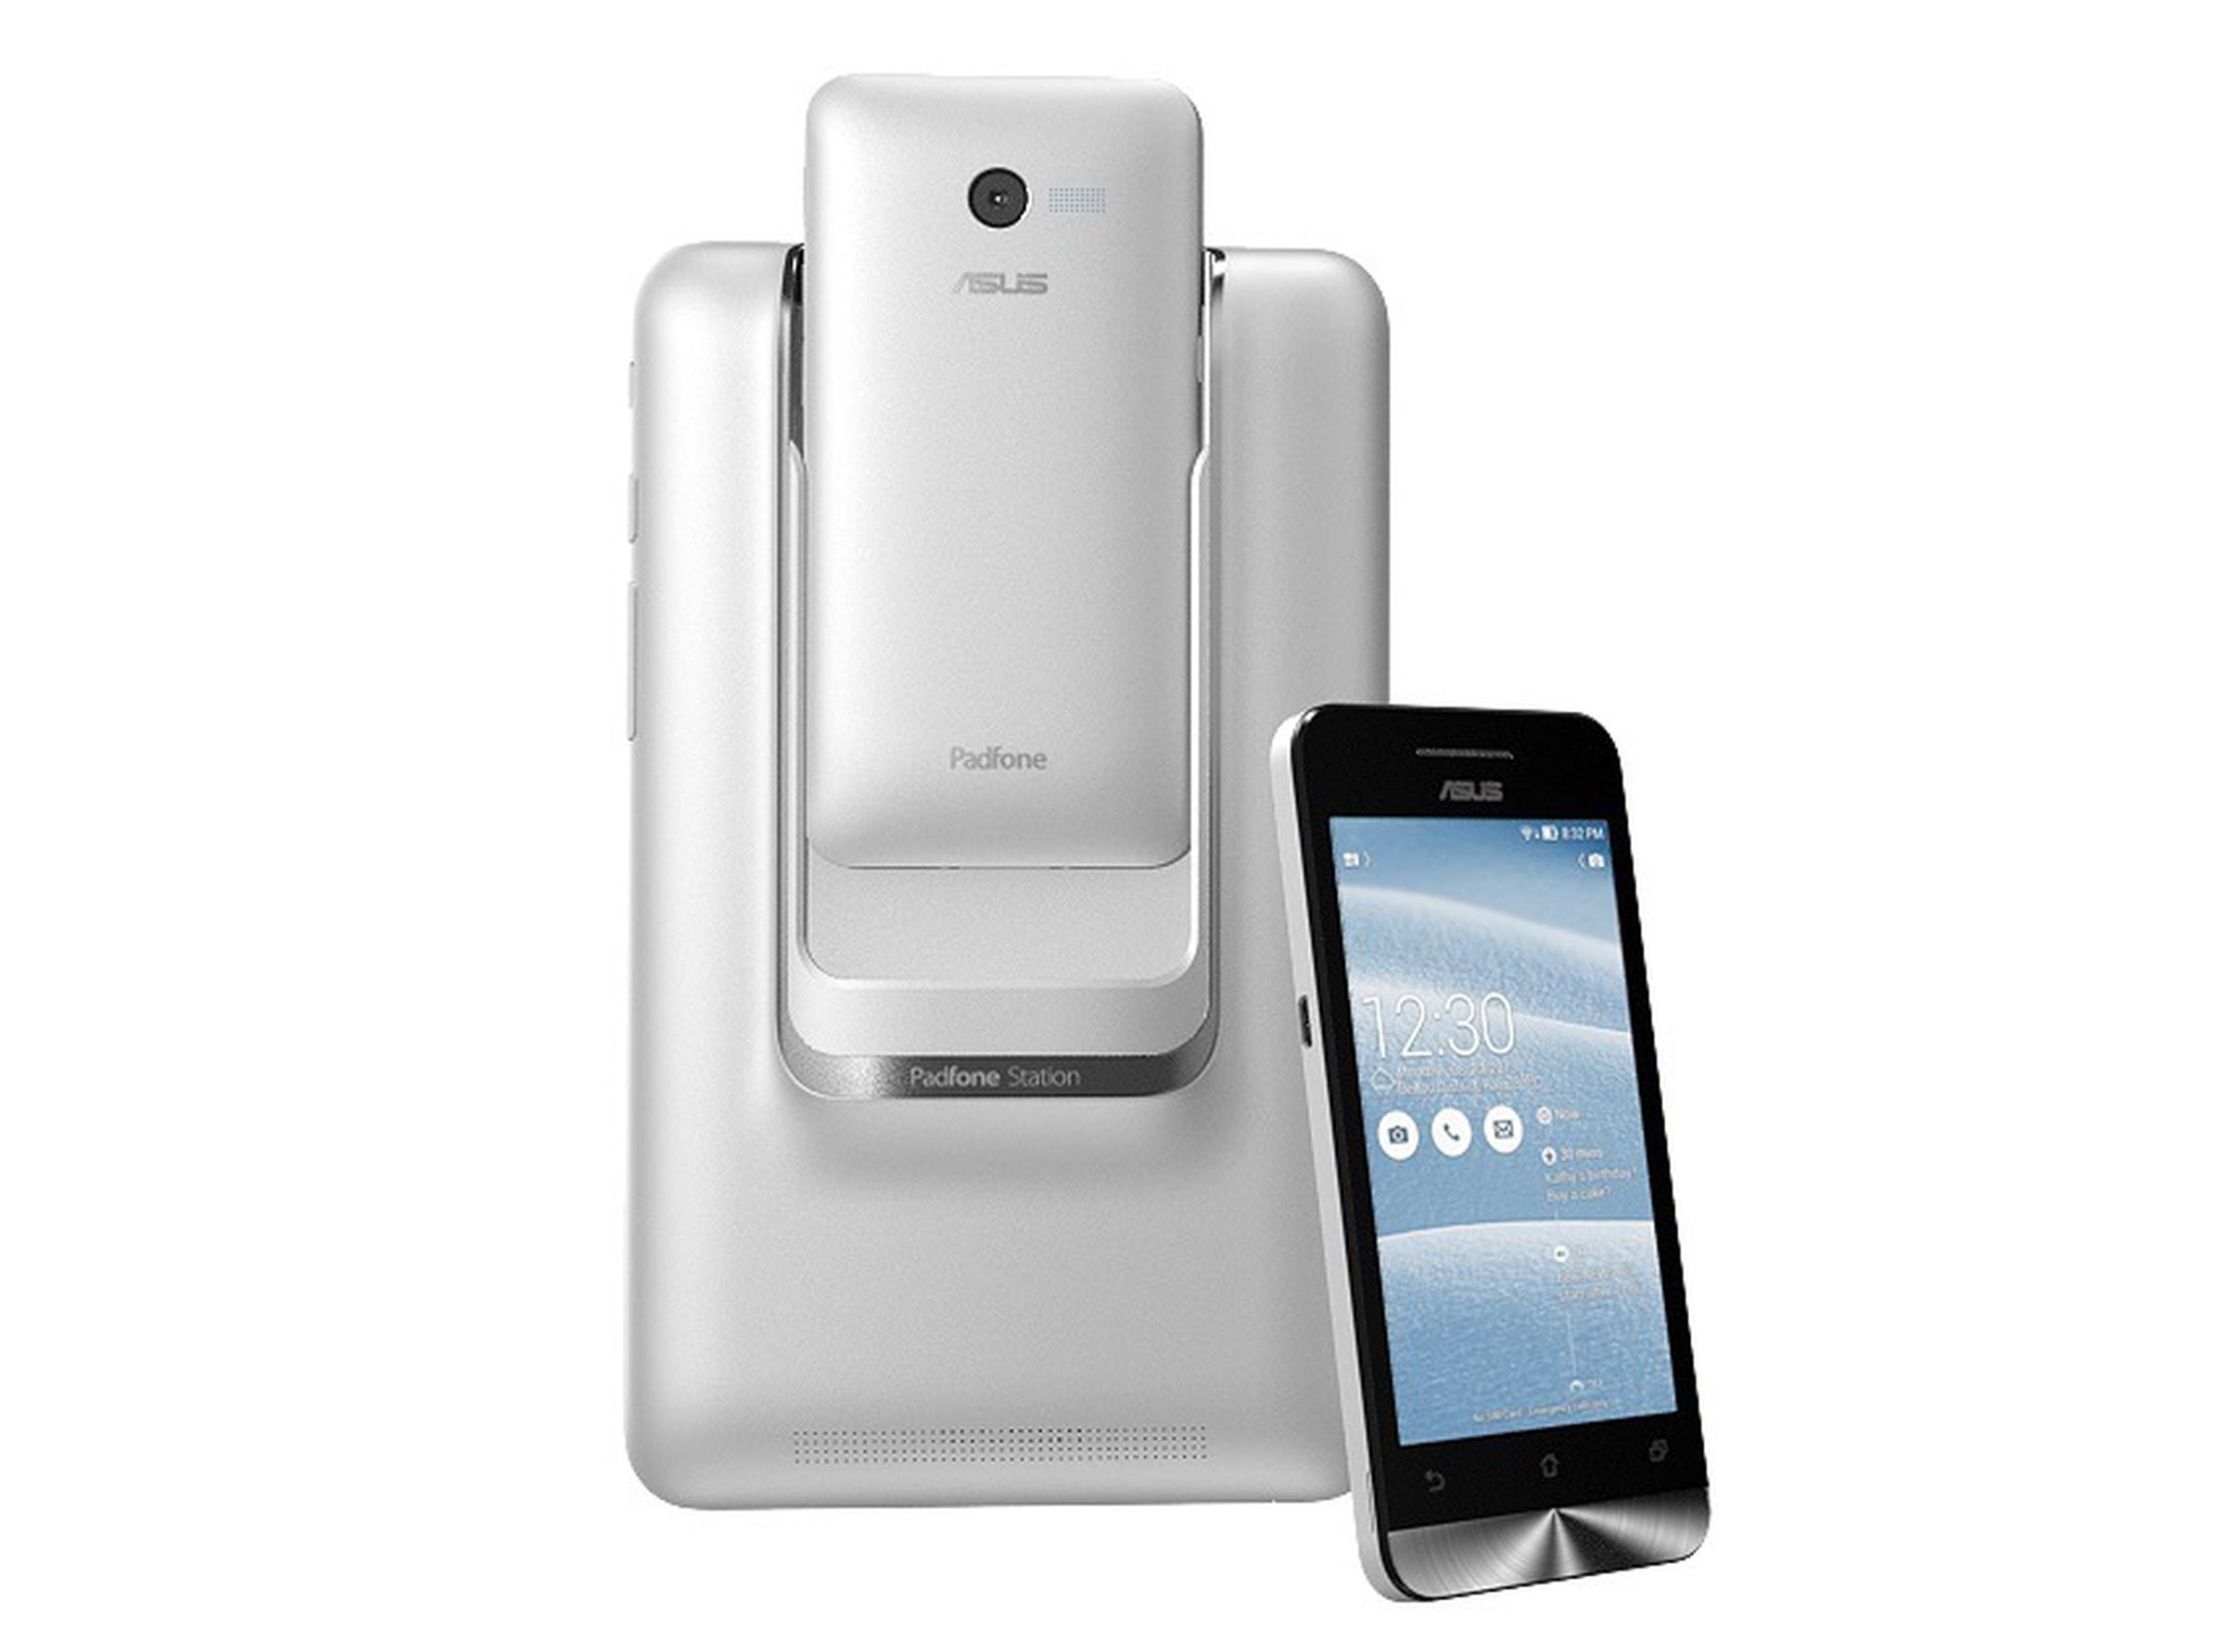 Asus PadFone mini and ZenFone pictures